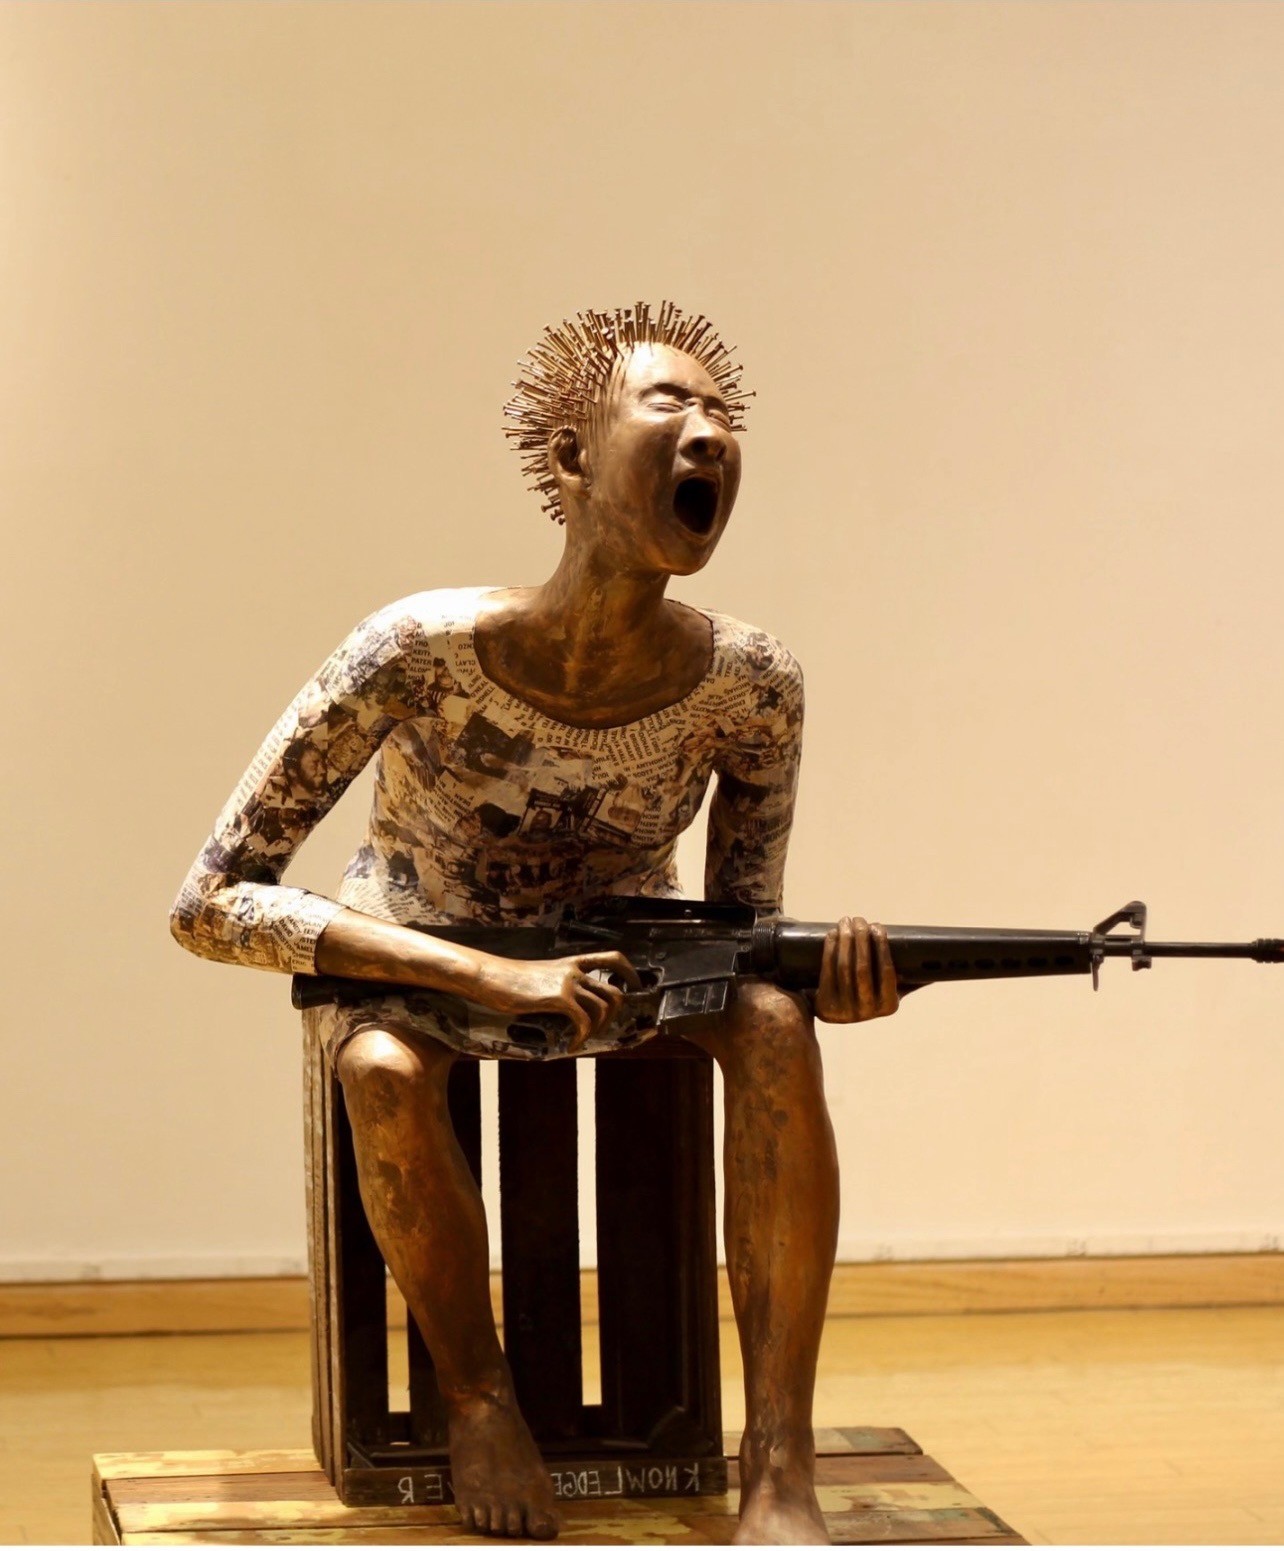 "Redemption" by Linda Mickens at the SAAM Black Power exhibition